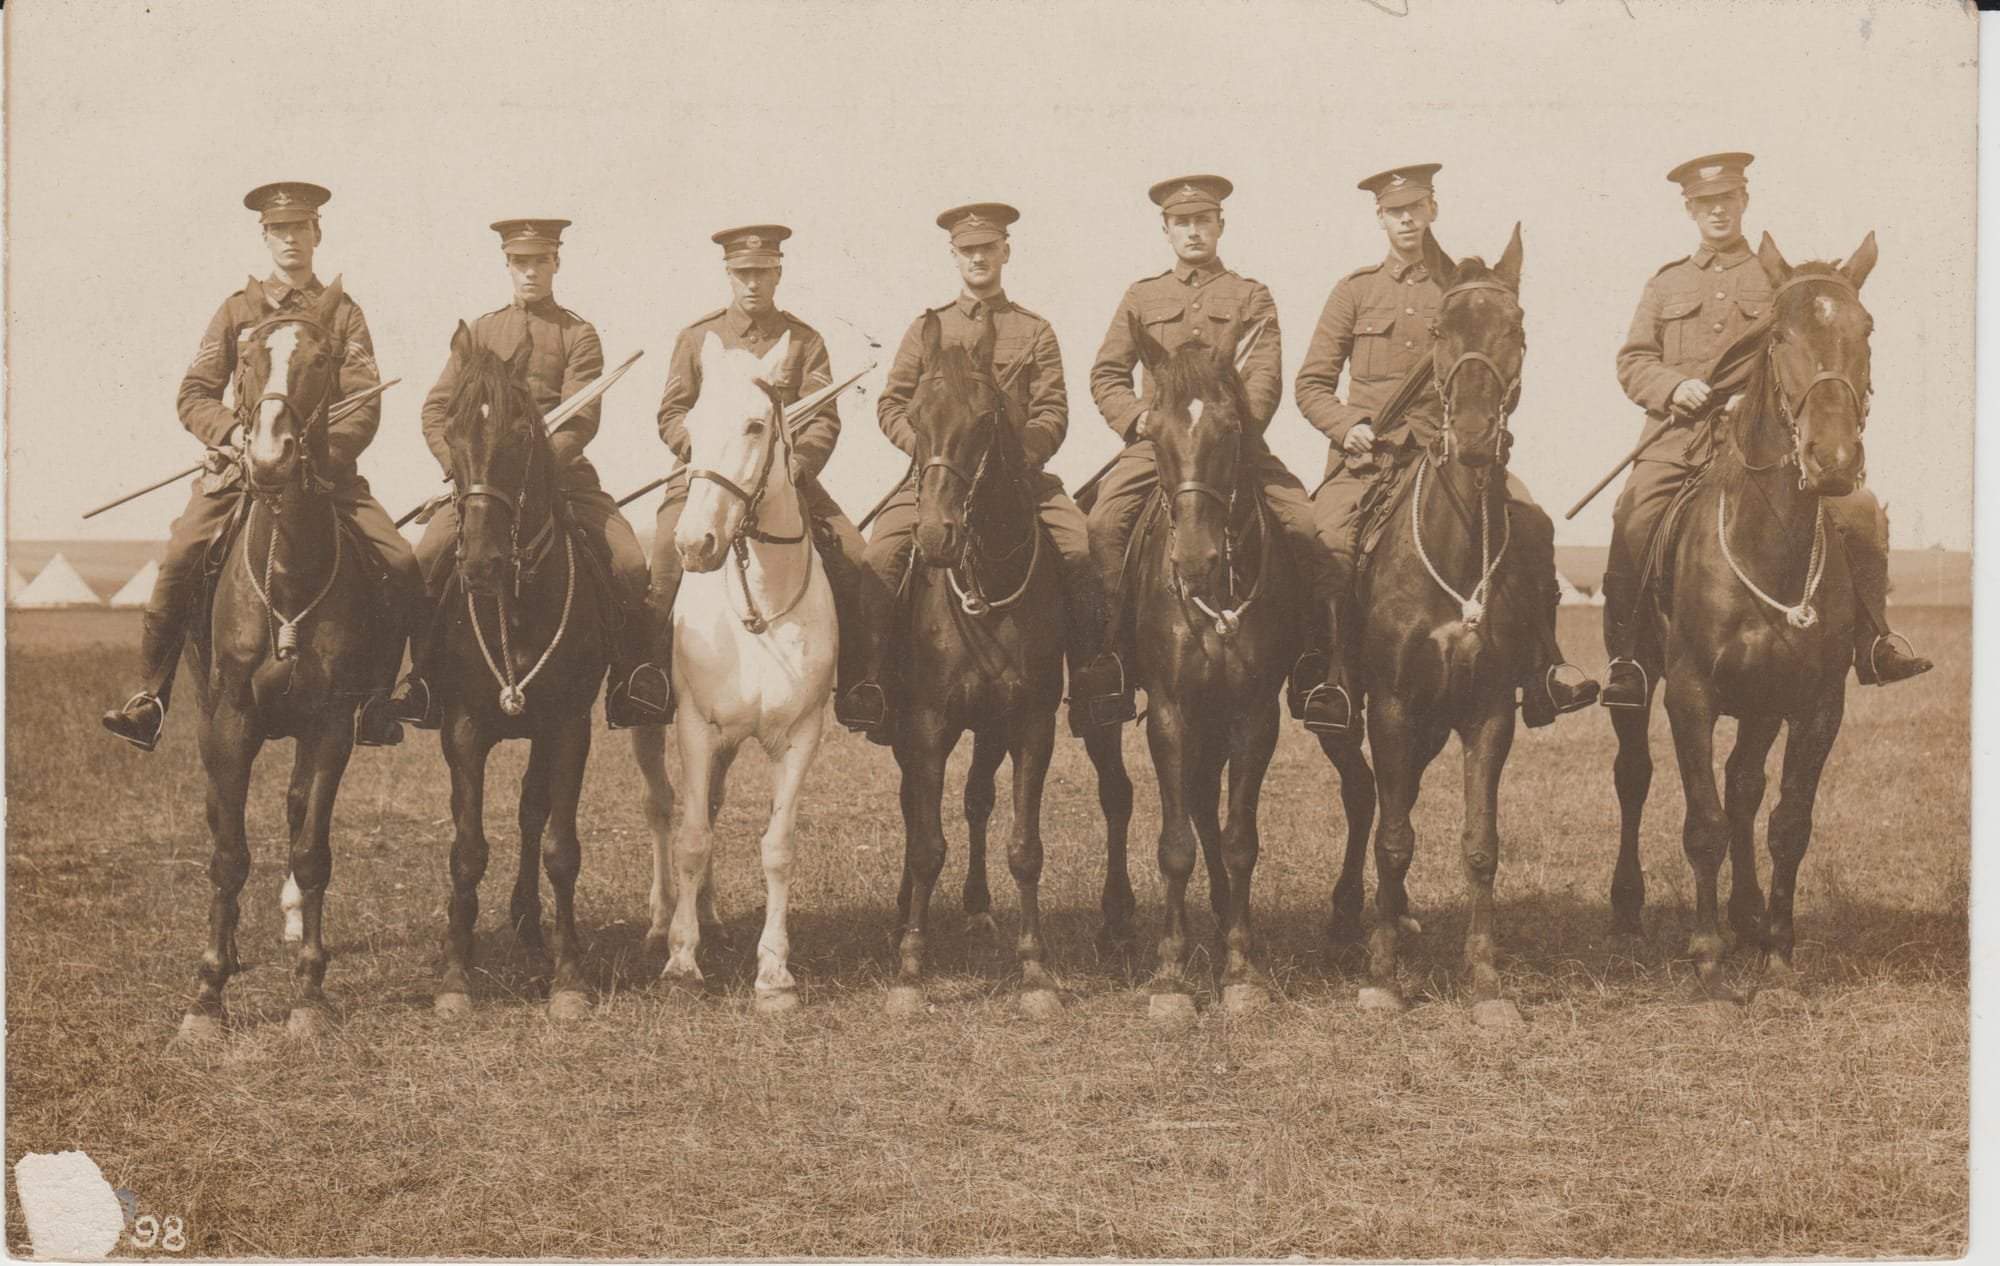 Mounted Troopers of the Australian, British African and New Zealand Troops of the King’s Colonials Imperial Yeomanry wearing a mixture of standard British Army Service Dress tunics and Undress tunics at signal training probably at annual camp circa 1908. The Sergeant is wearing a standard British Army Service Dress tunic with ‘C’ Squadron headdress and matching collar badges (Courtesy of Iain Davidson collection).